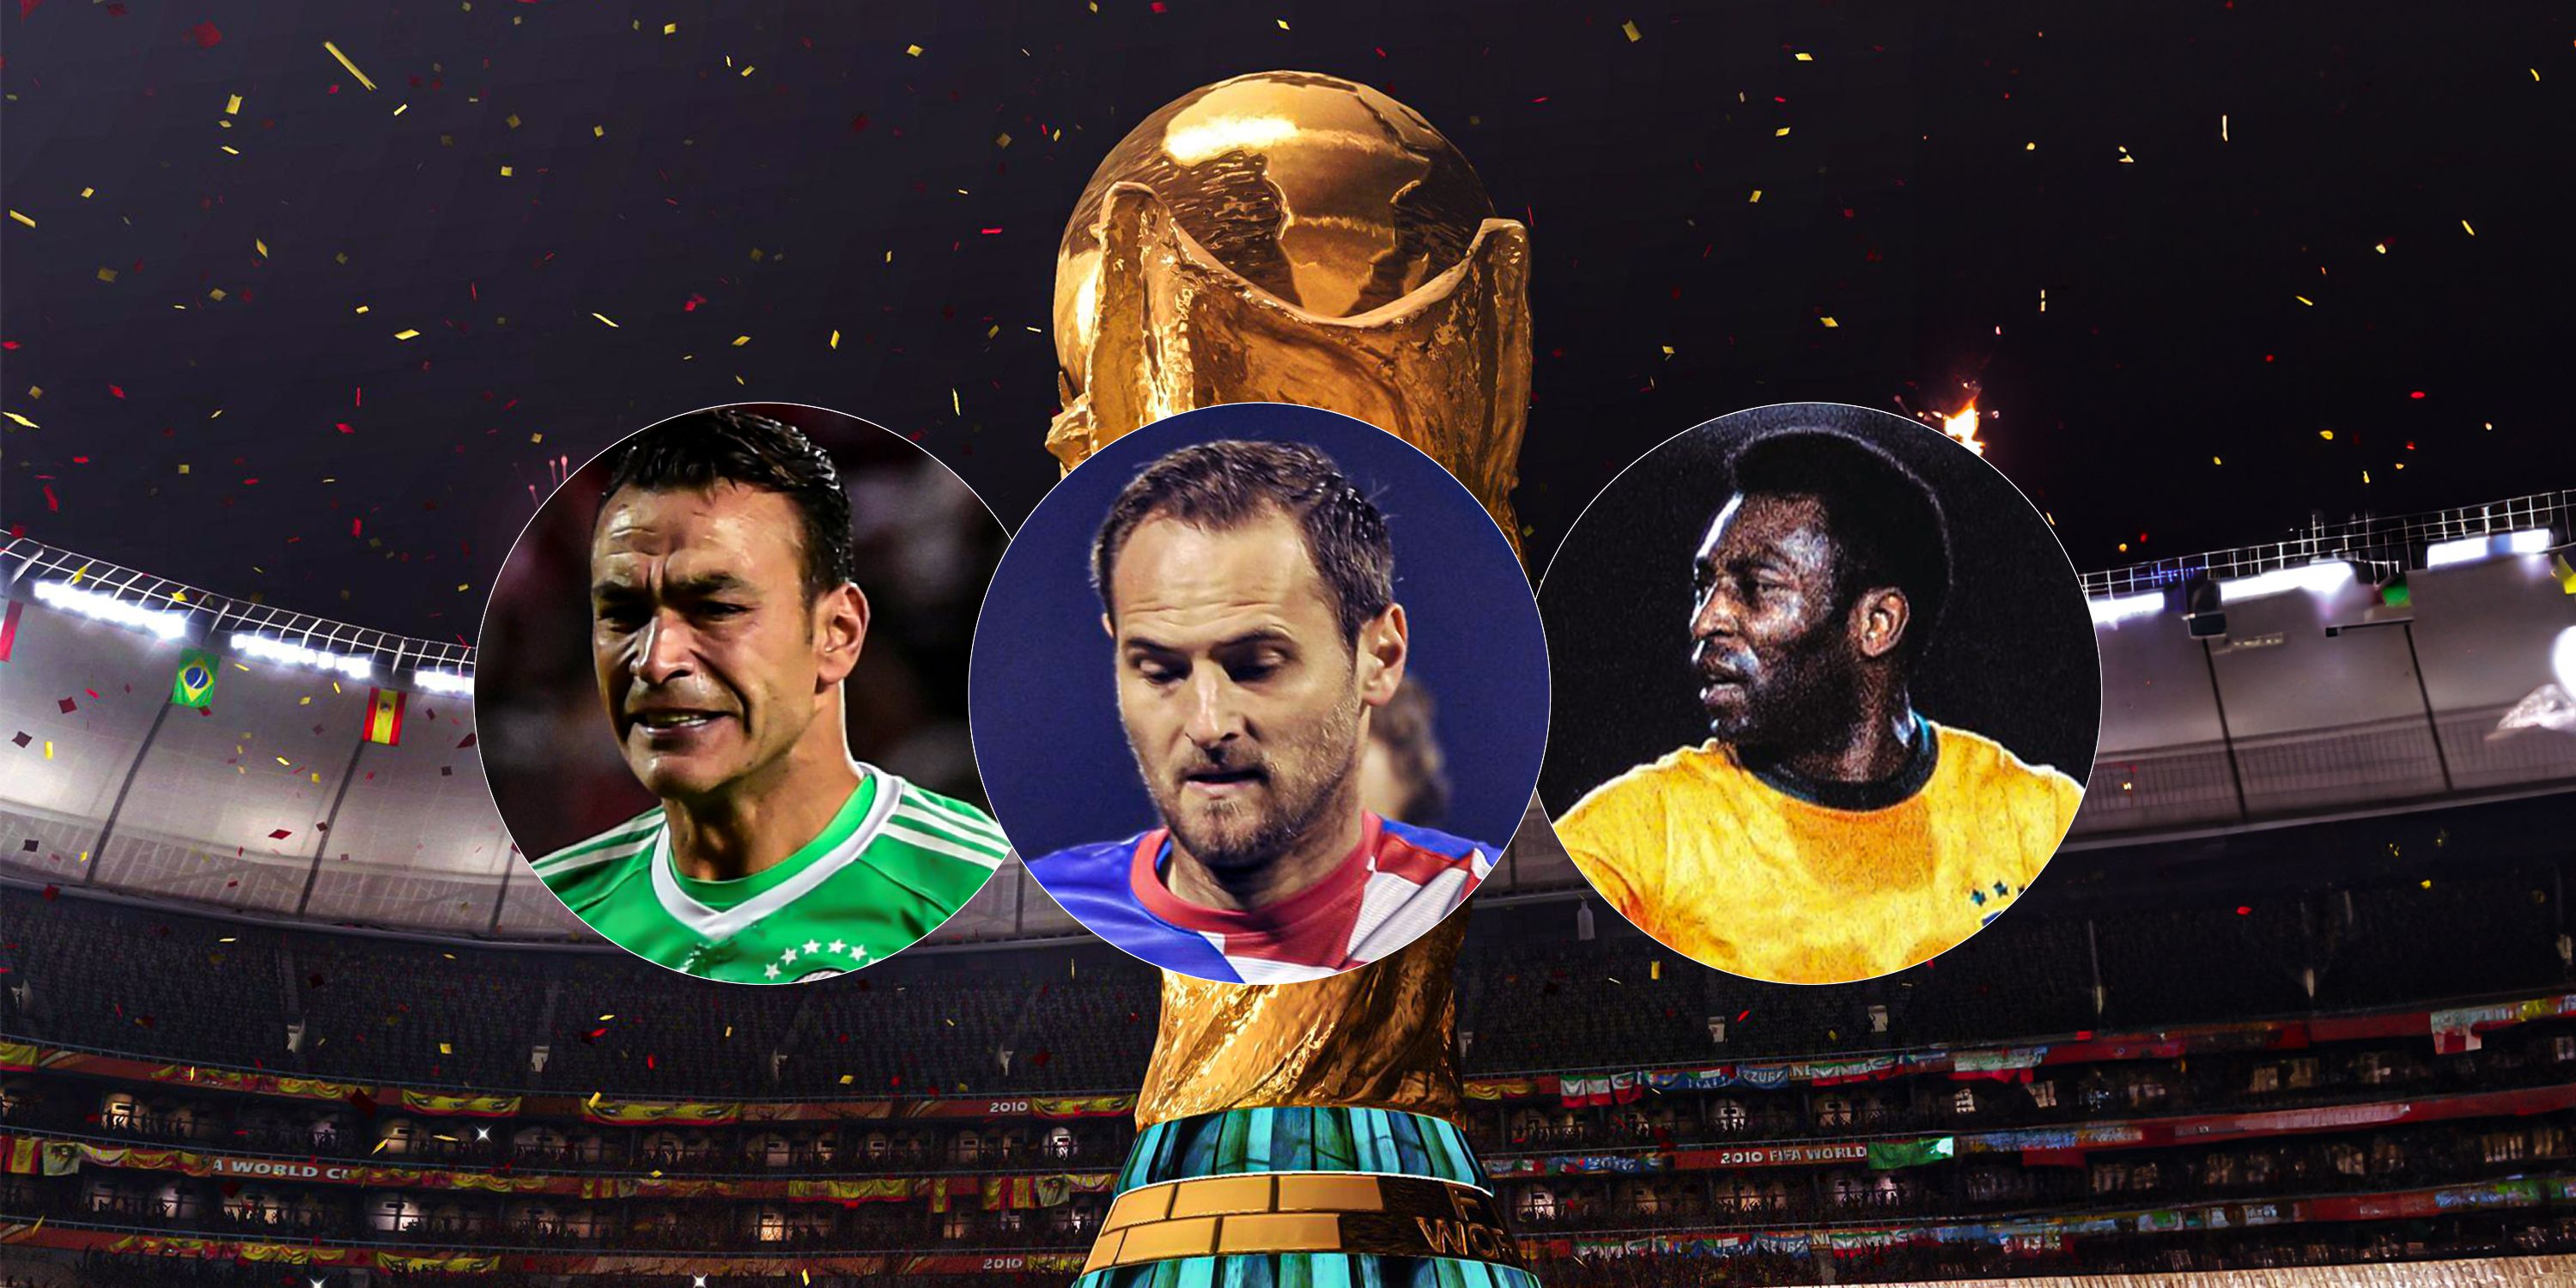 Pele, Josip Simunic and Essam El Hadary in front of the World Cup logo.